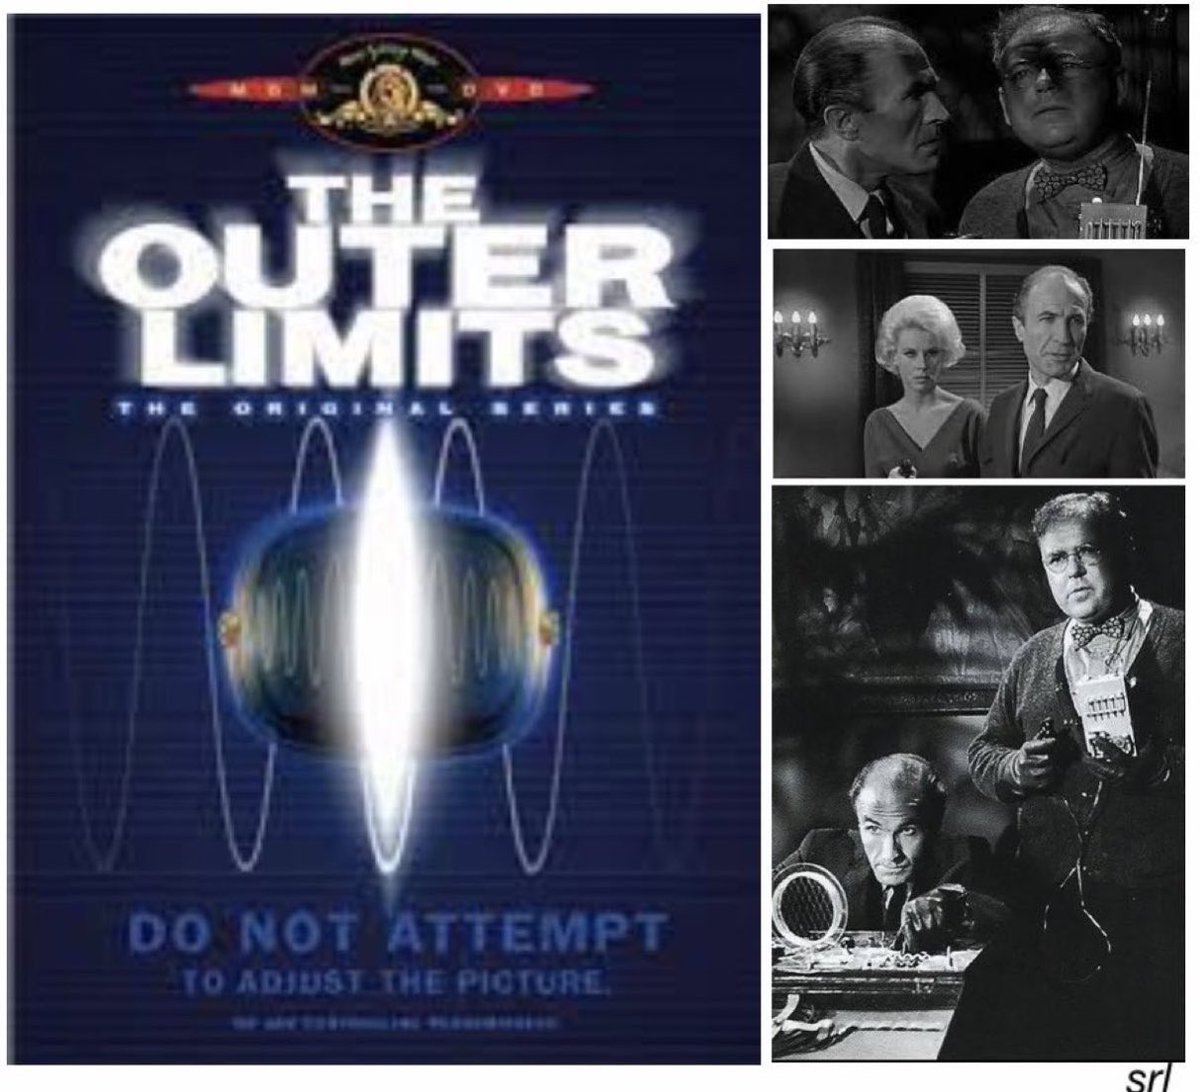 11:35am TODAY on @TalkingPicsTV

From 1964, Ep 16 of 📺 #TheOuterLimits - “Controlled Experiment” directed & written by #LeslieStevens

🌟 #BarryMorse #CarrollOConnor #GraceLeeWhitney

#VicPerrin narrates the introduction & epilogue

🤣It’s the only #Comedy episode🤣of the series